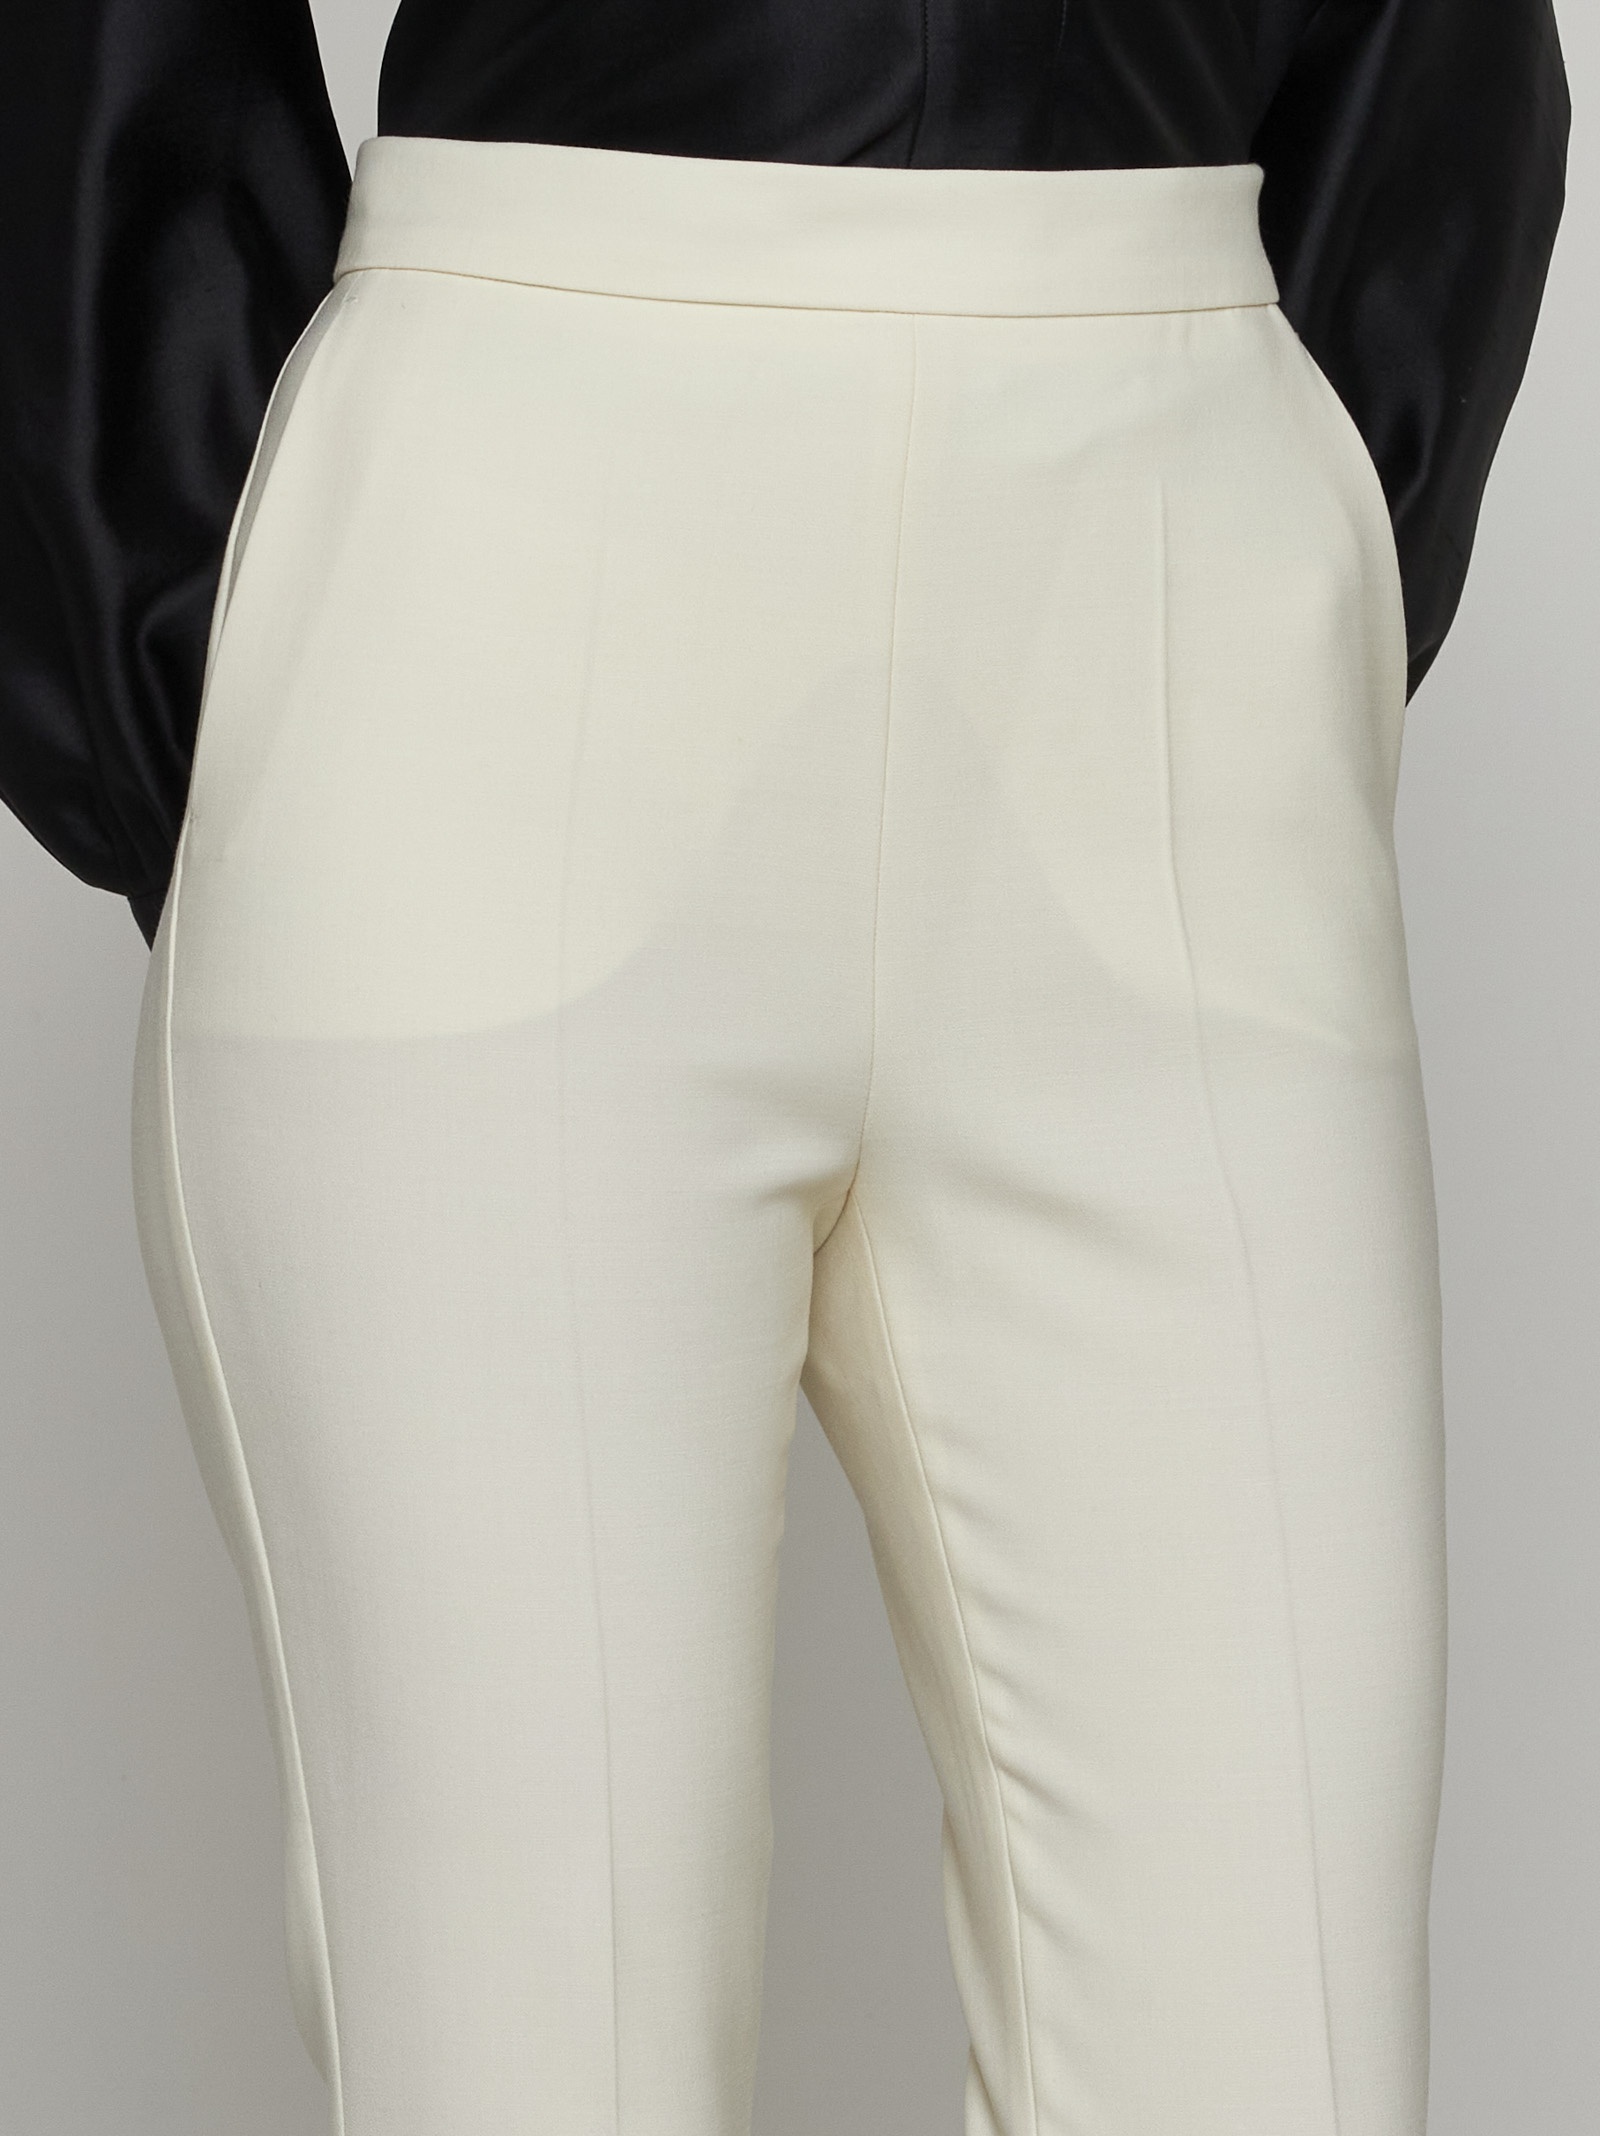 Nepeta stretch wool trousers - 5